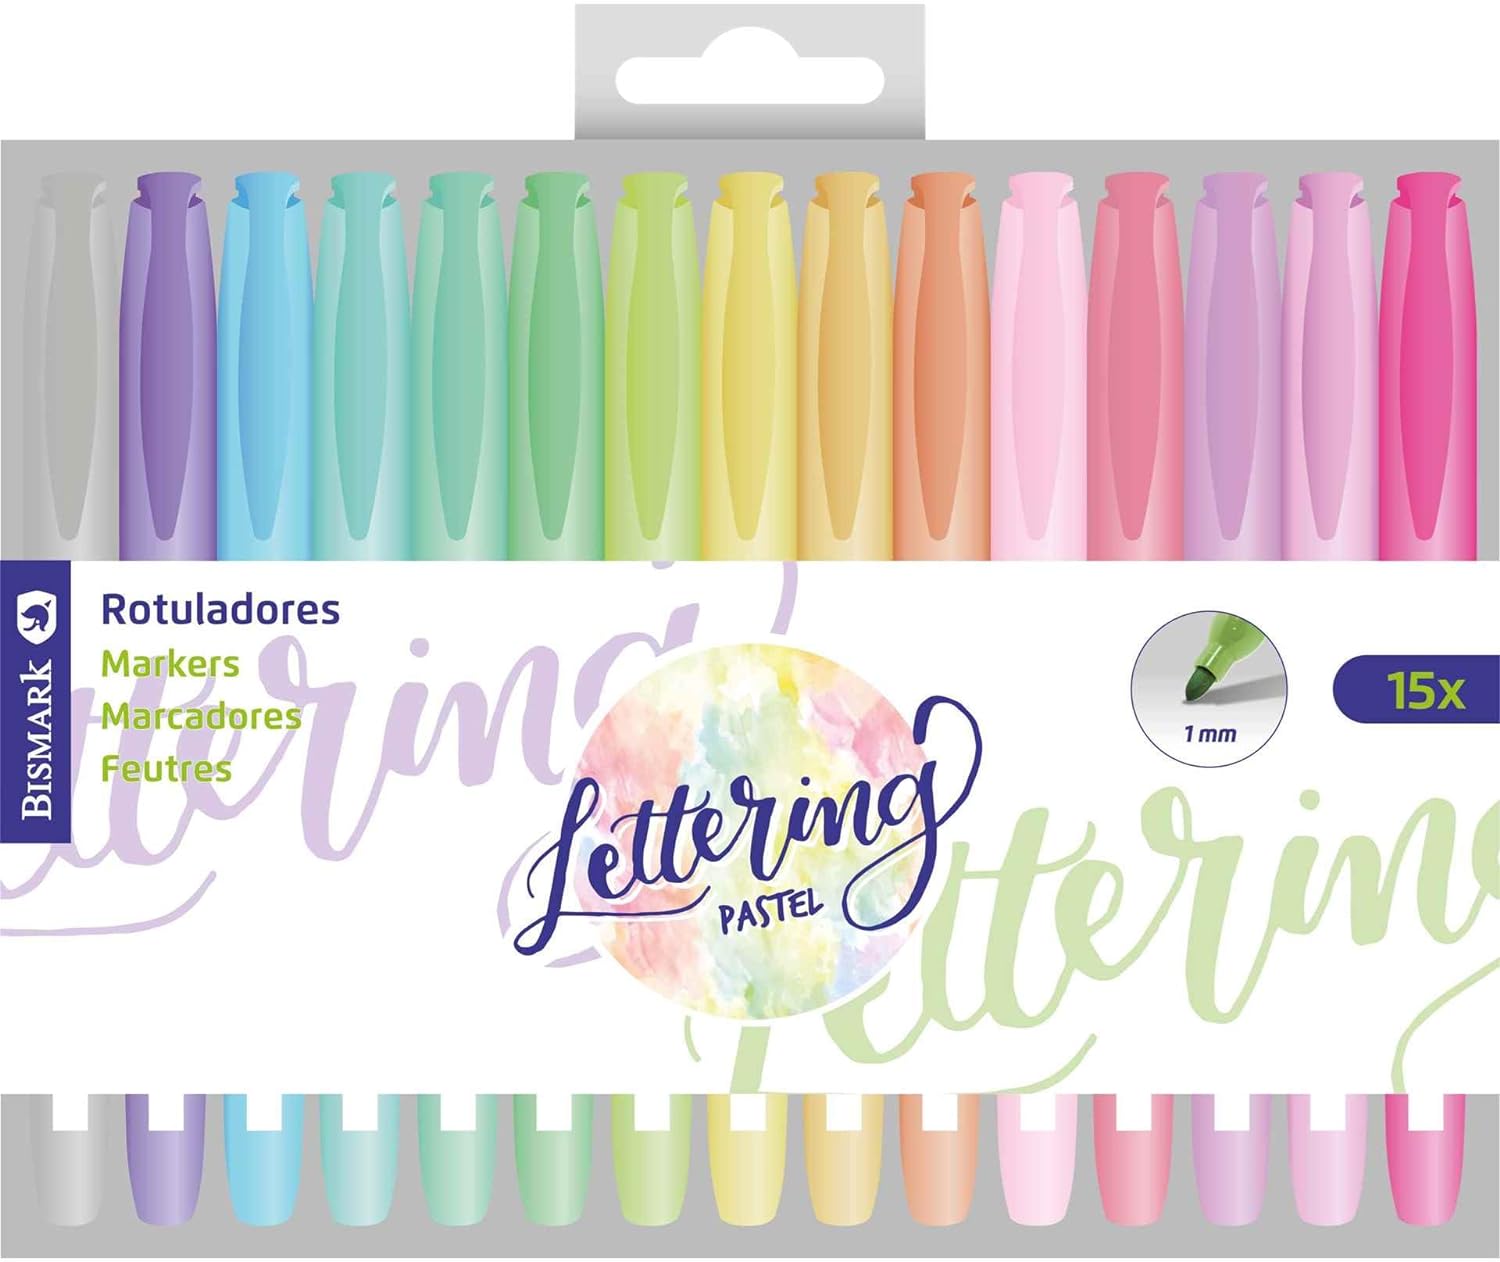 ROTULADORES PASTEL LETTERING 1mm